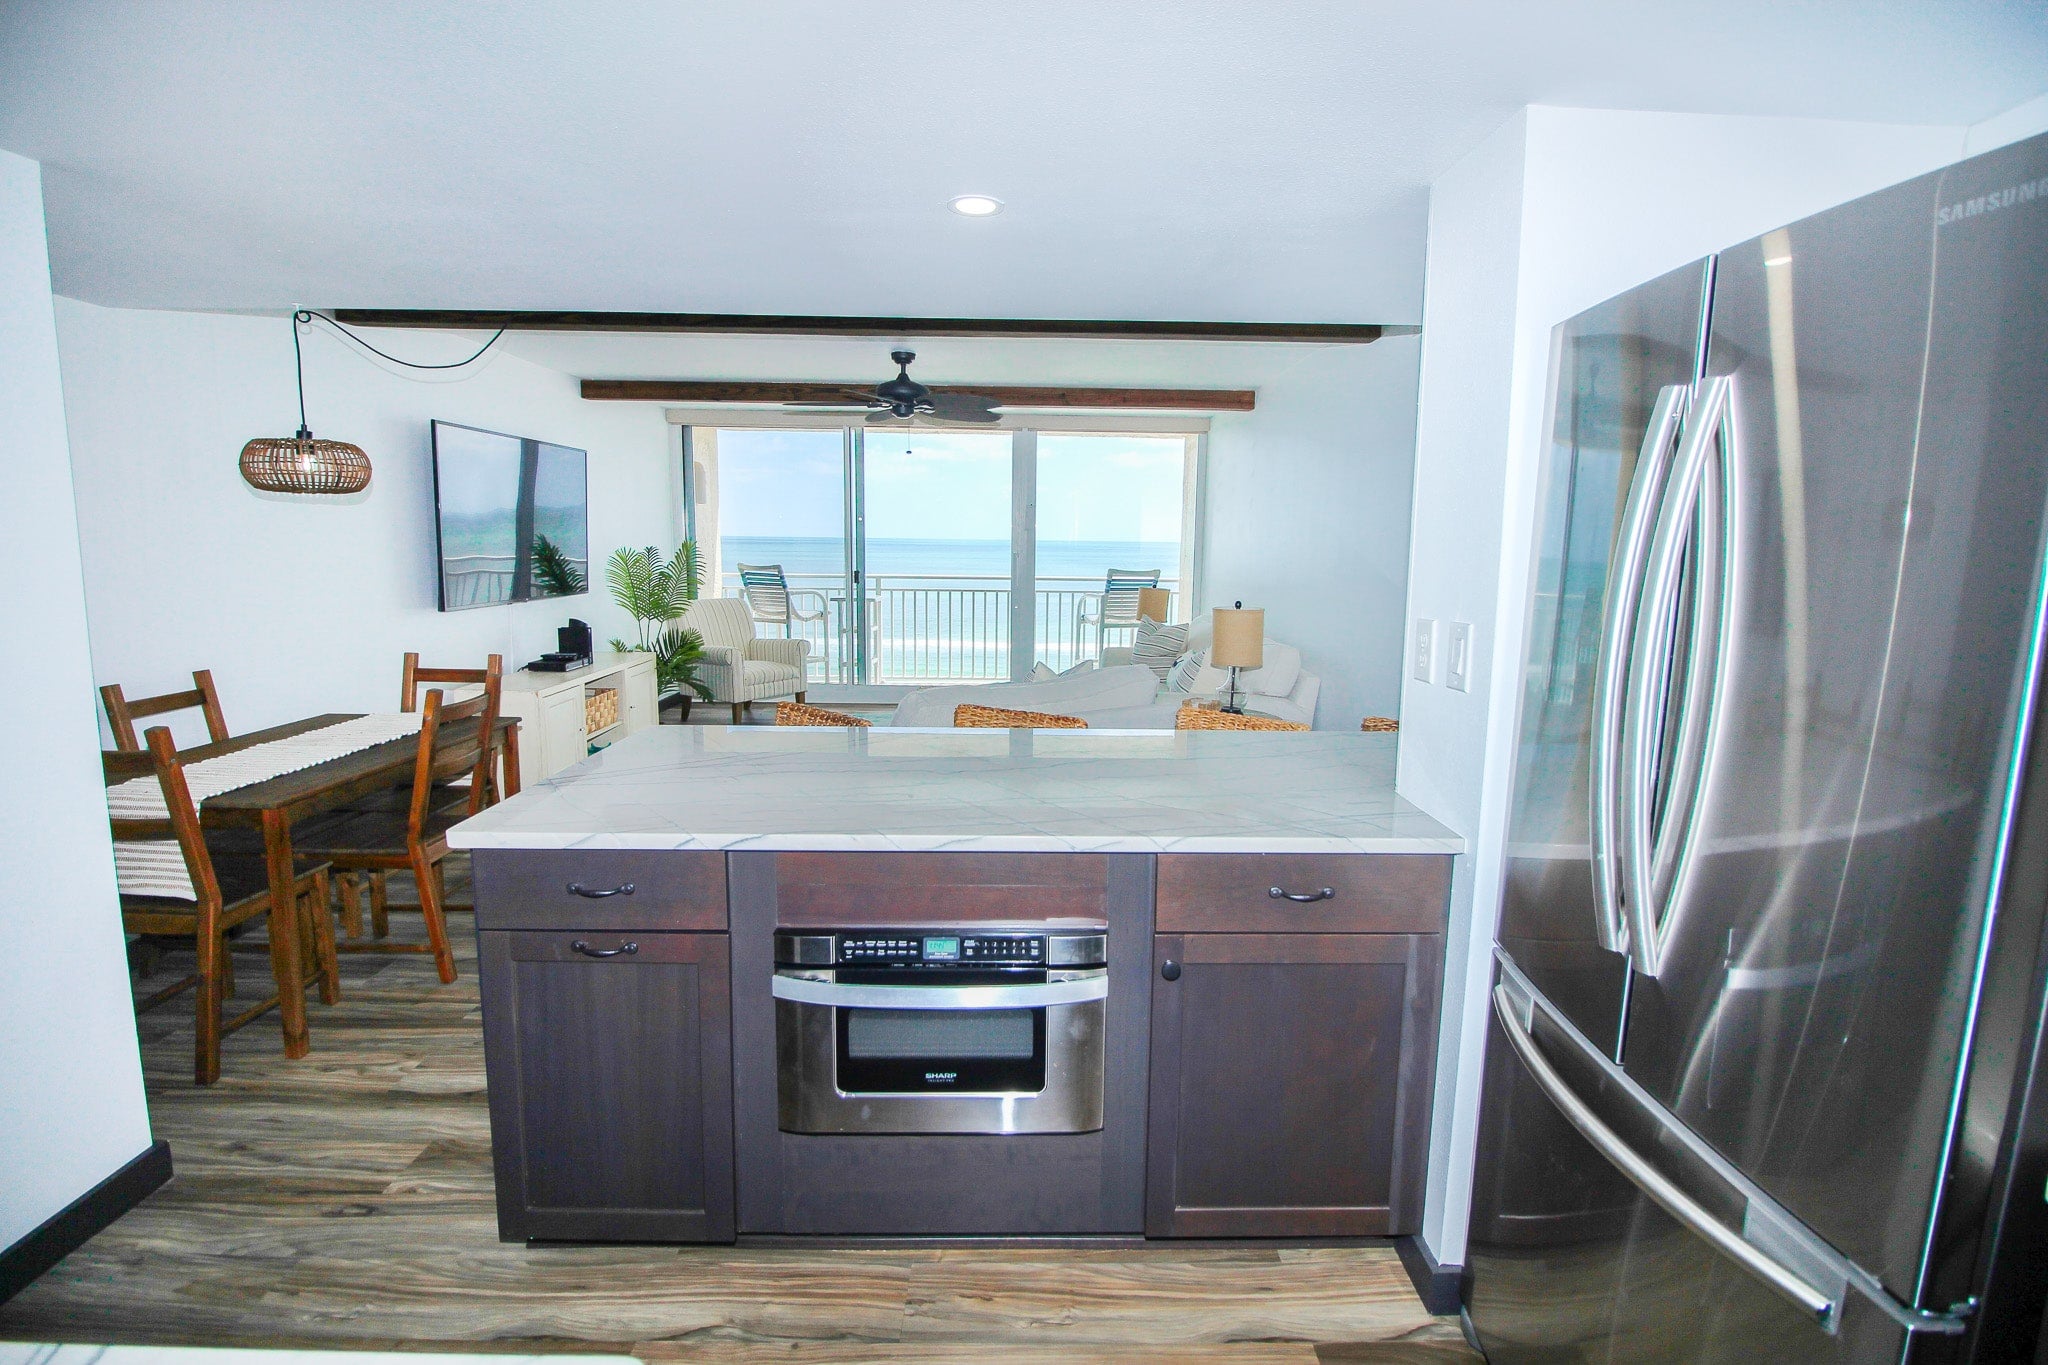 Incredible ocean view from the kitchen